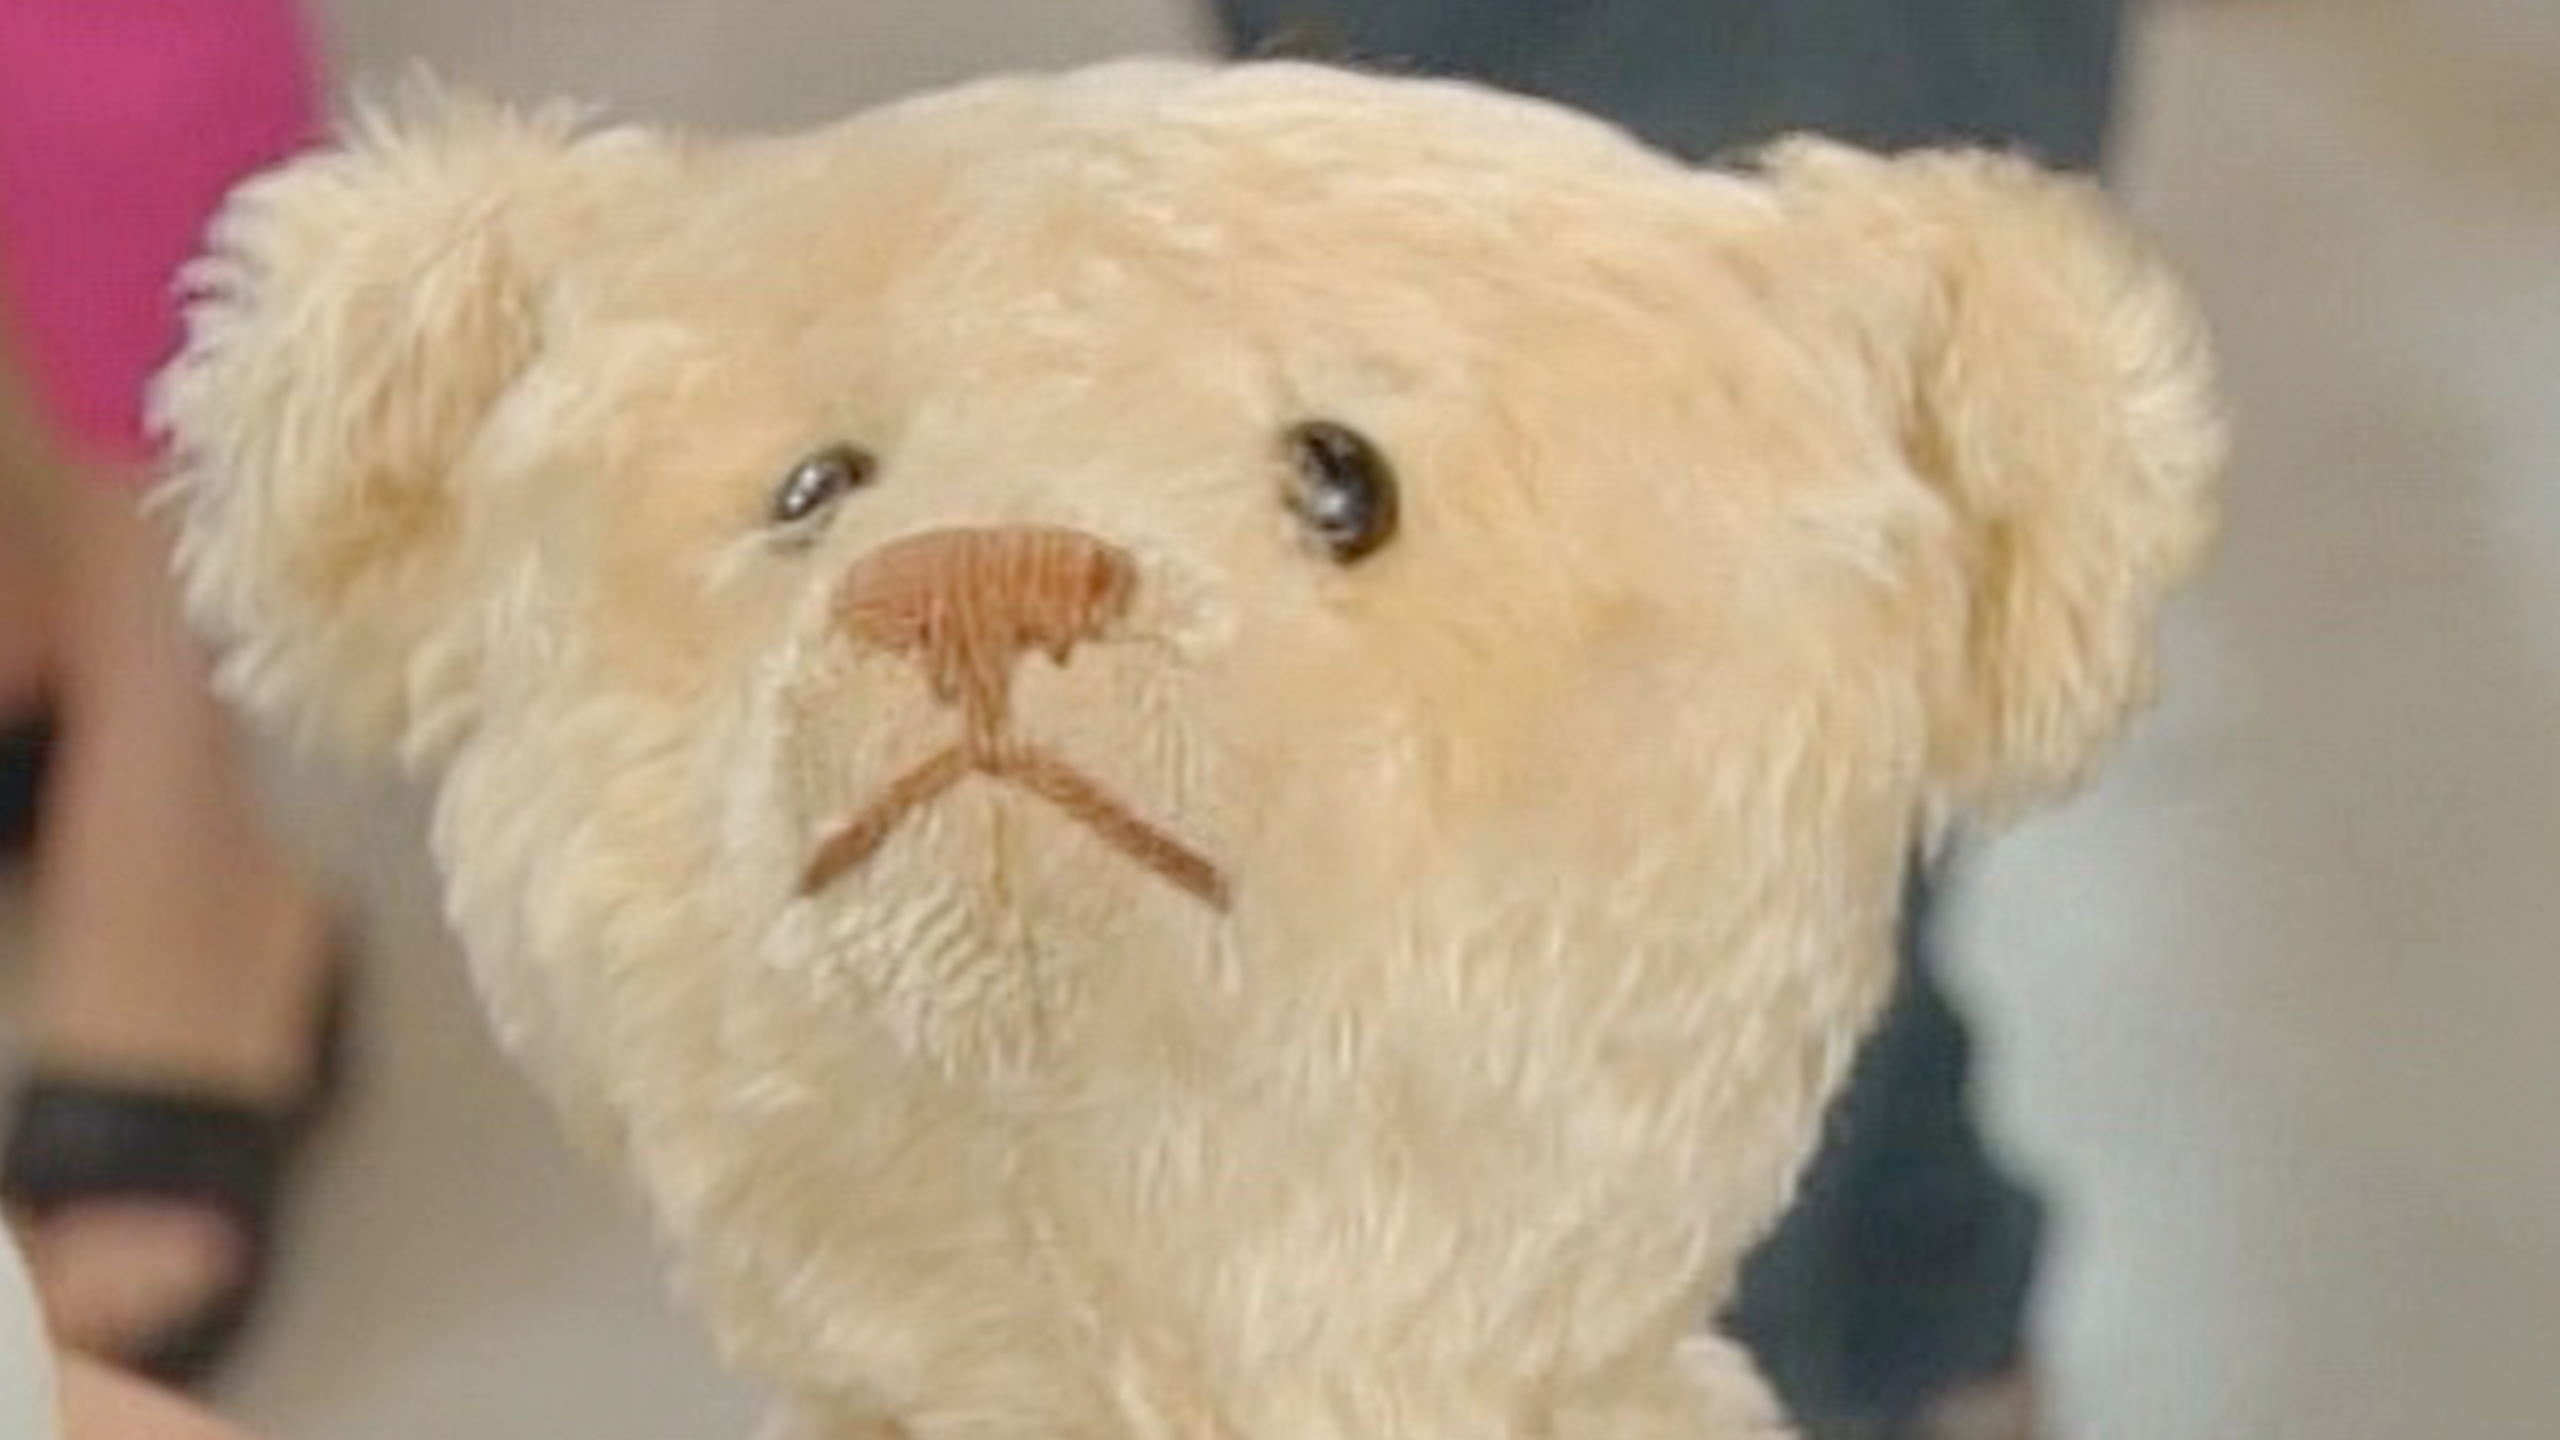 World's most expensive teddy bear worth $30,000 holds a diamond